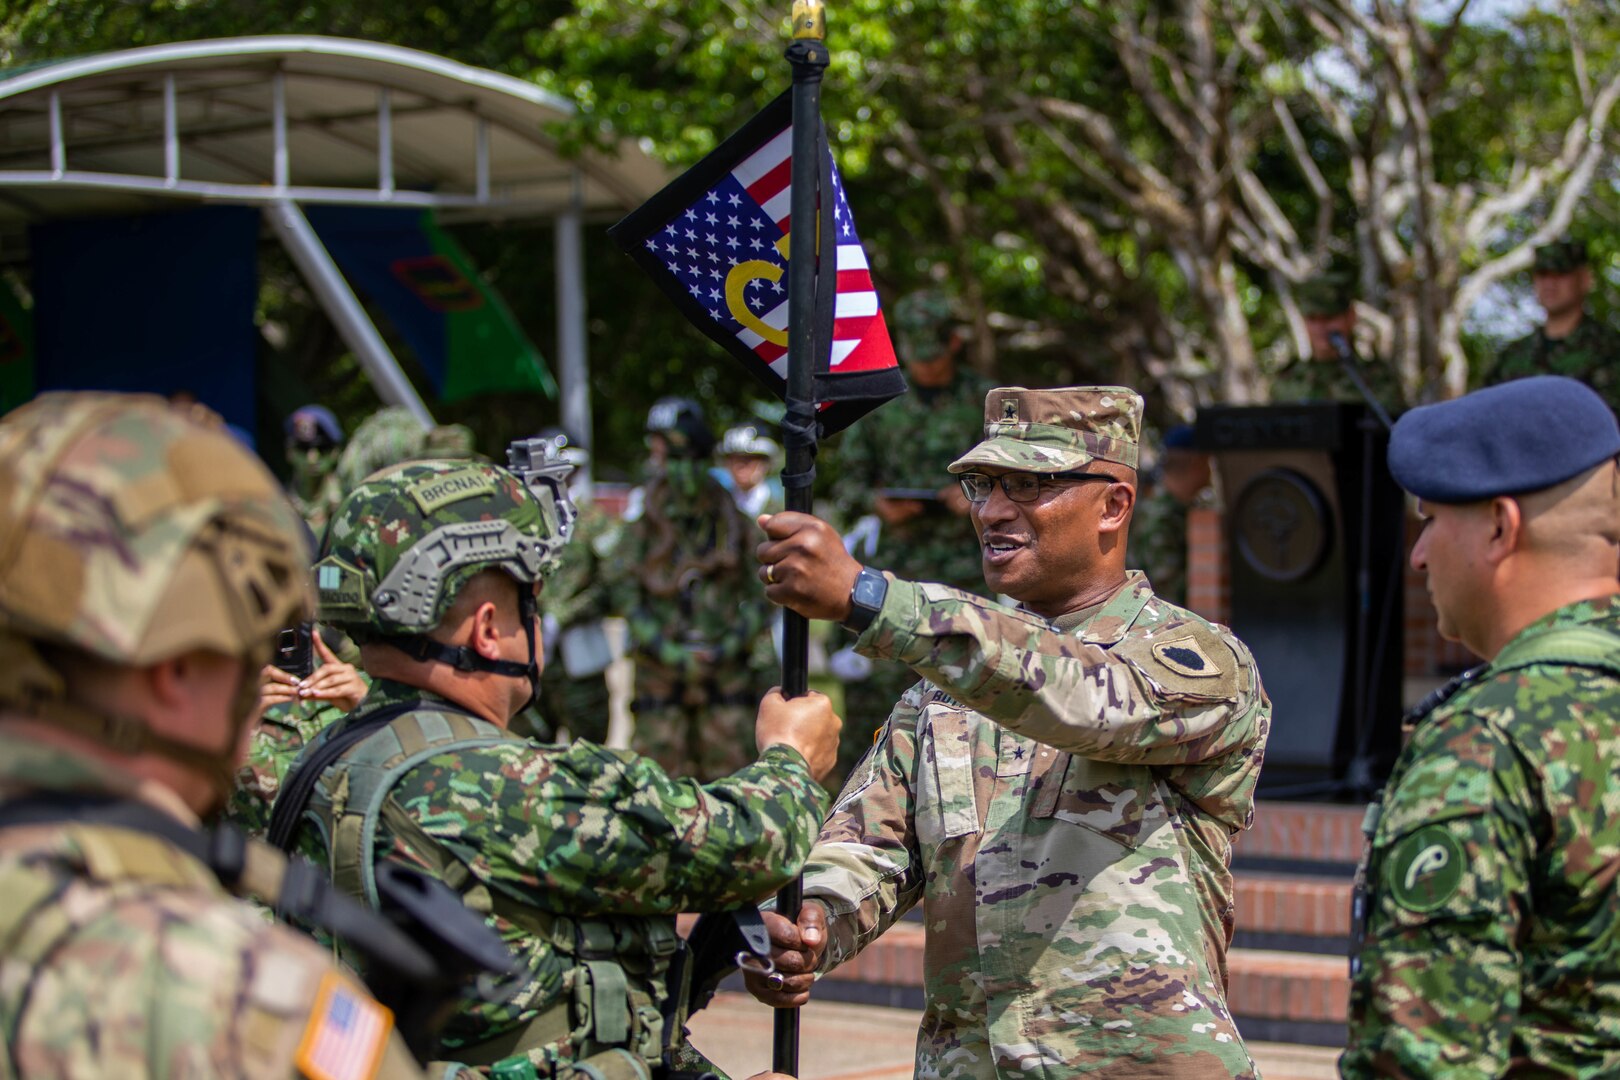 Brig. Gen. Rodney Boyd, Assistant Adjutant General – Army and Commander of the Illinois Army National Guard, passes the Combined Task Force (CTF) guidon to the CTF commander during the opening ceremony of Exercise Southern Vanguard 23 on Nov. 8 at Tolemaida Military Base, Colombia.